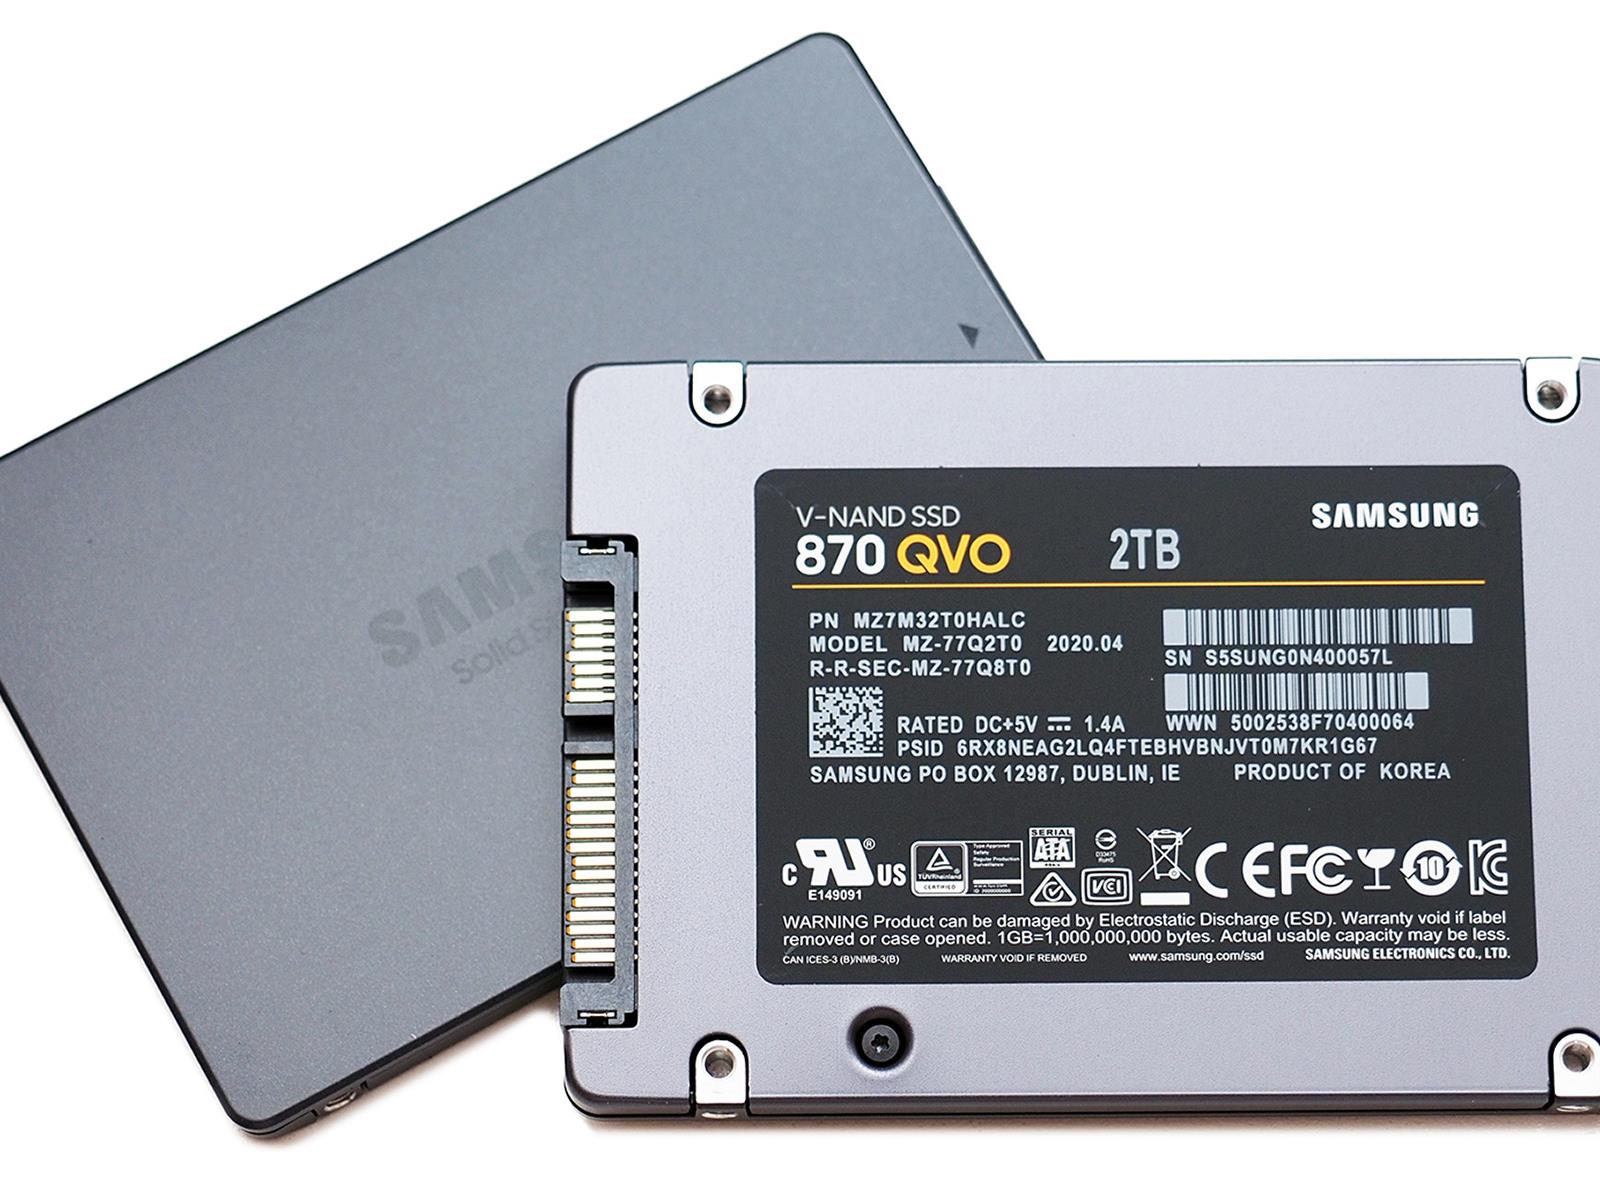 PC/タブレット PCパーツ Samsung SSD 870 QVO Review: Terabytes Of Solid State Storage 